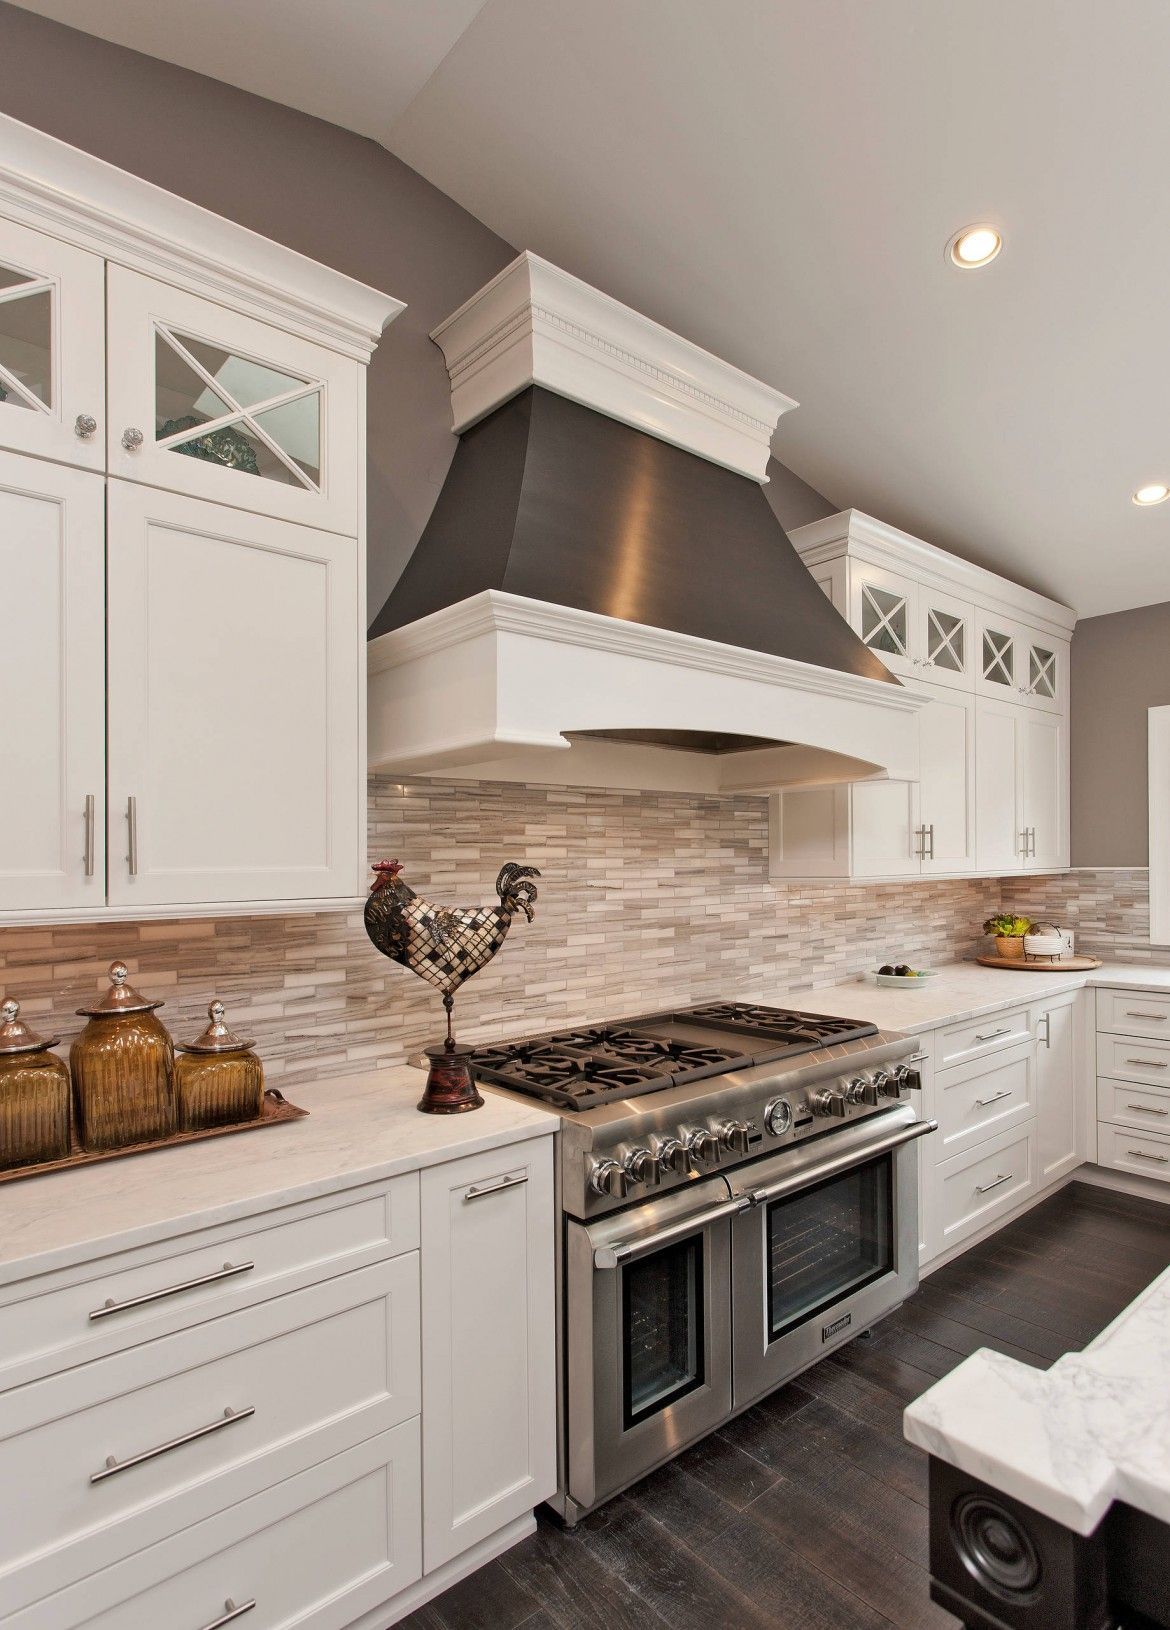 46 Reasons Why Your Kitchen Should Definitely Have White Cabinets